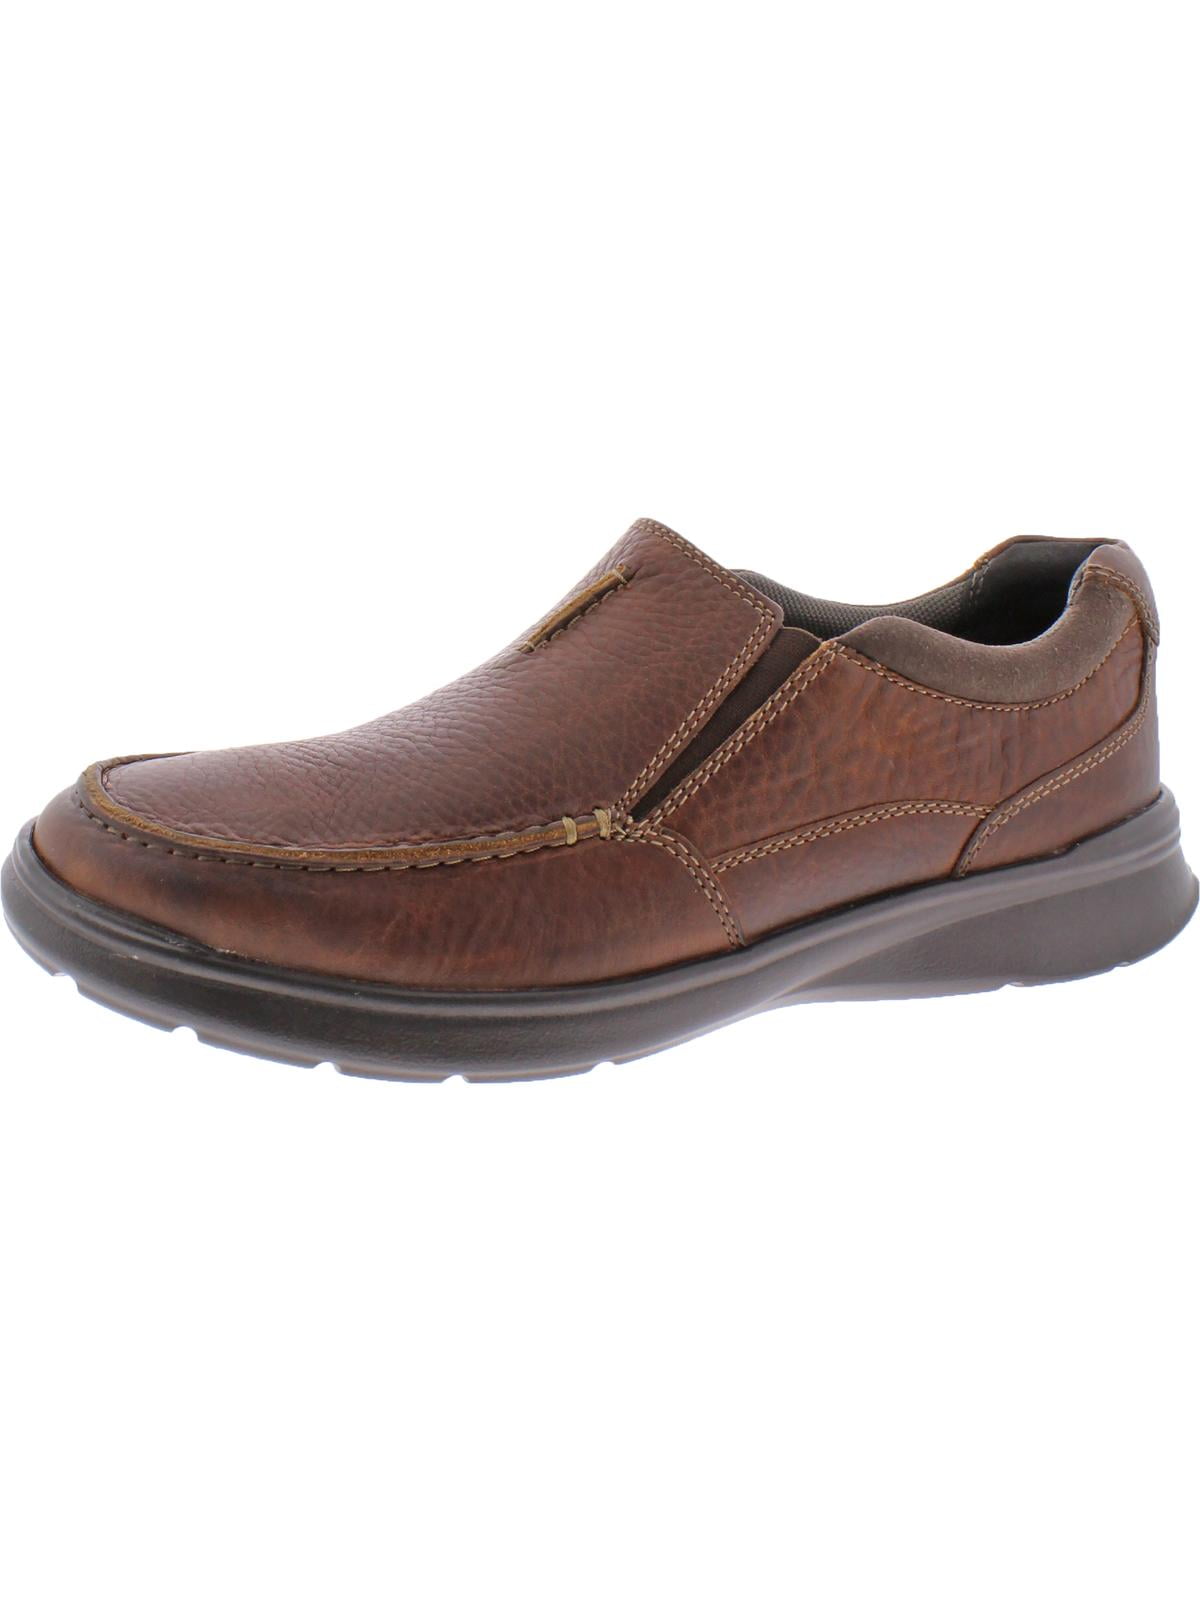 Clarks Cotrell Free Mens Brown Leather Smart Cushioned WIDE H FIT Slip On Shoes 